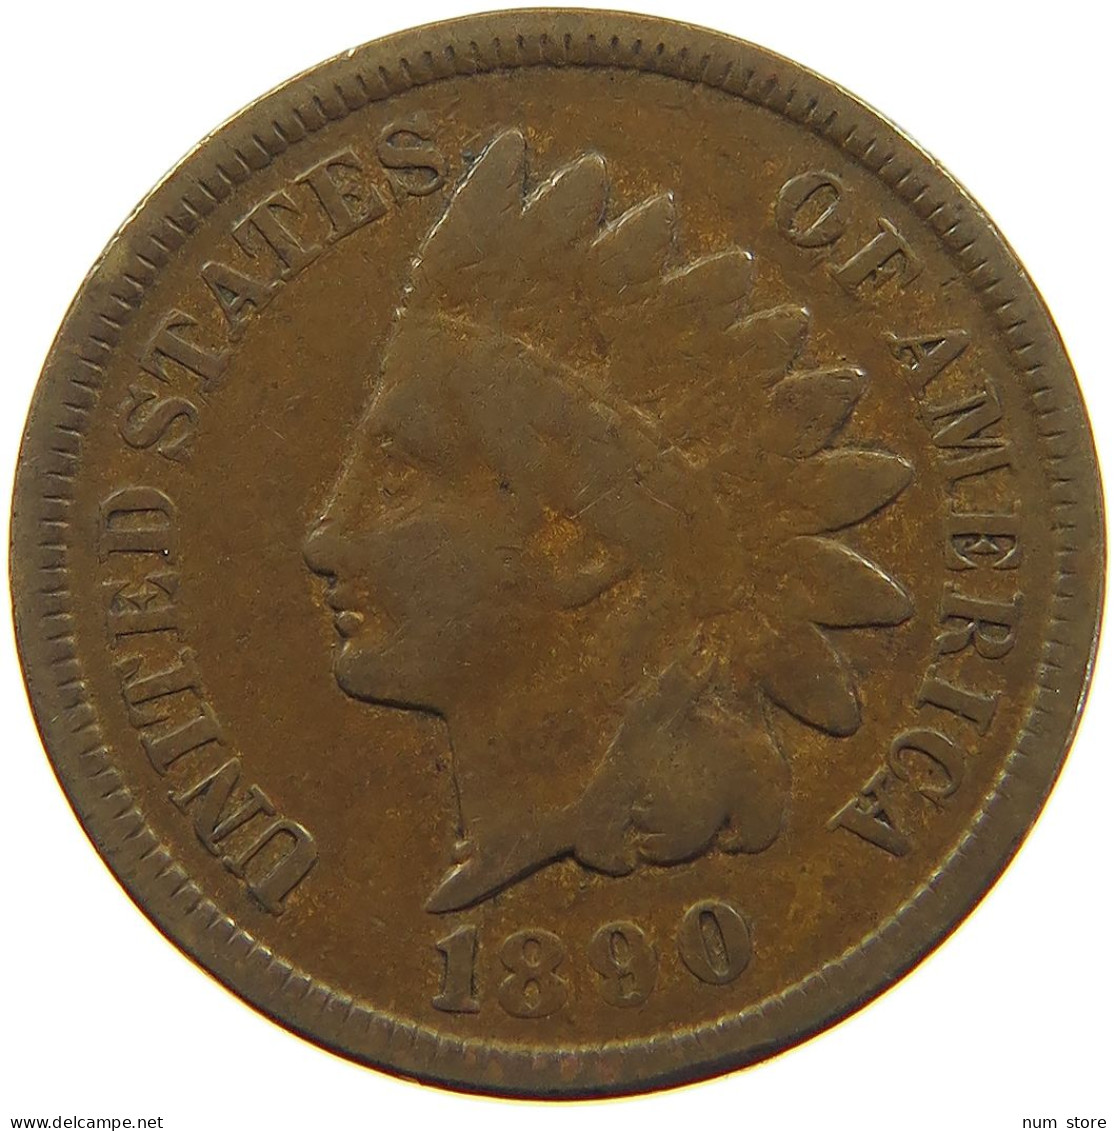 UNITED STATES OF AMERICA CENT 1890 INDIAN HEAD #c081 0461 - 1859-1909: Indian Head